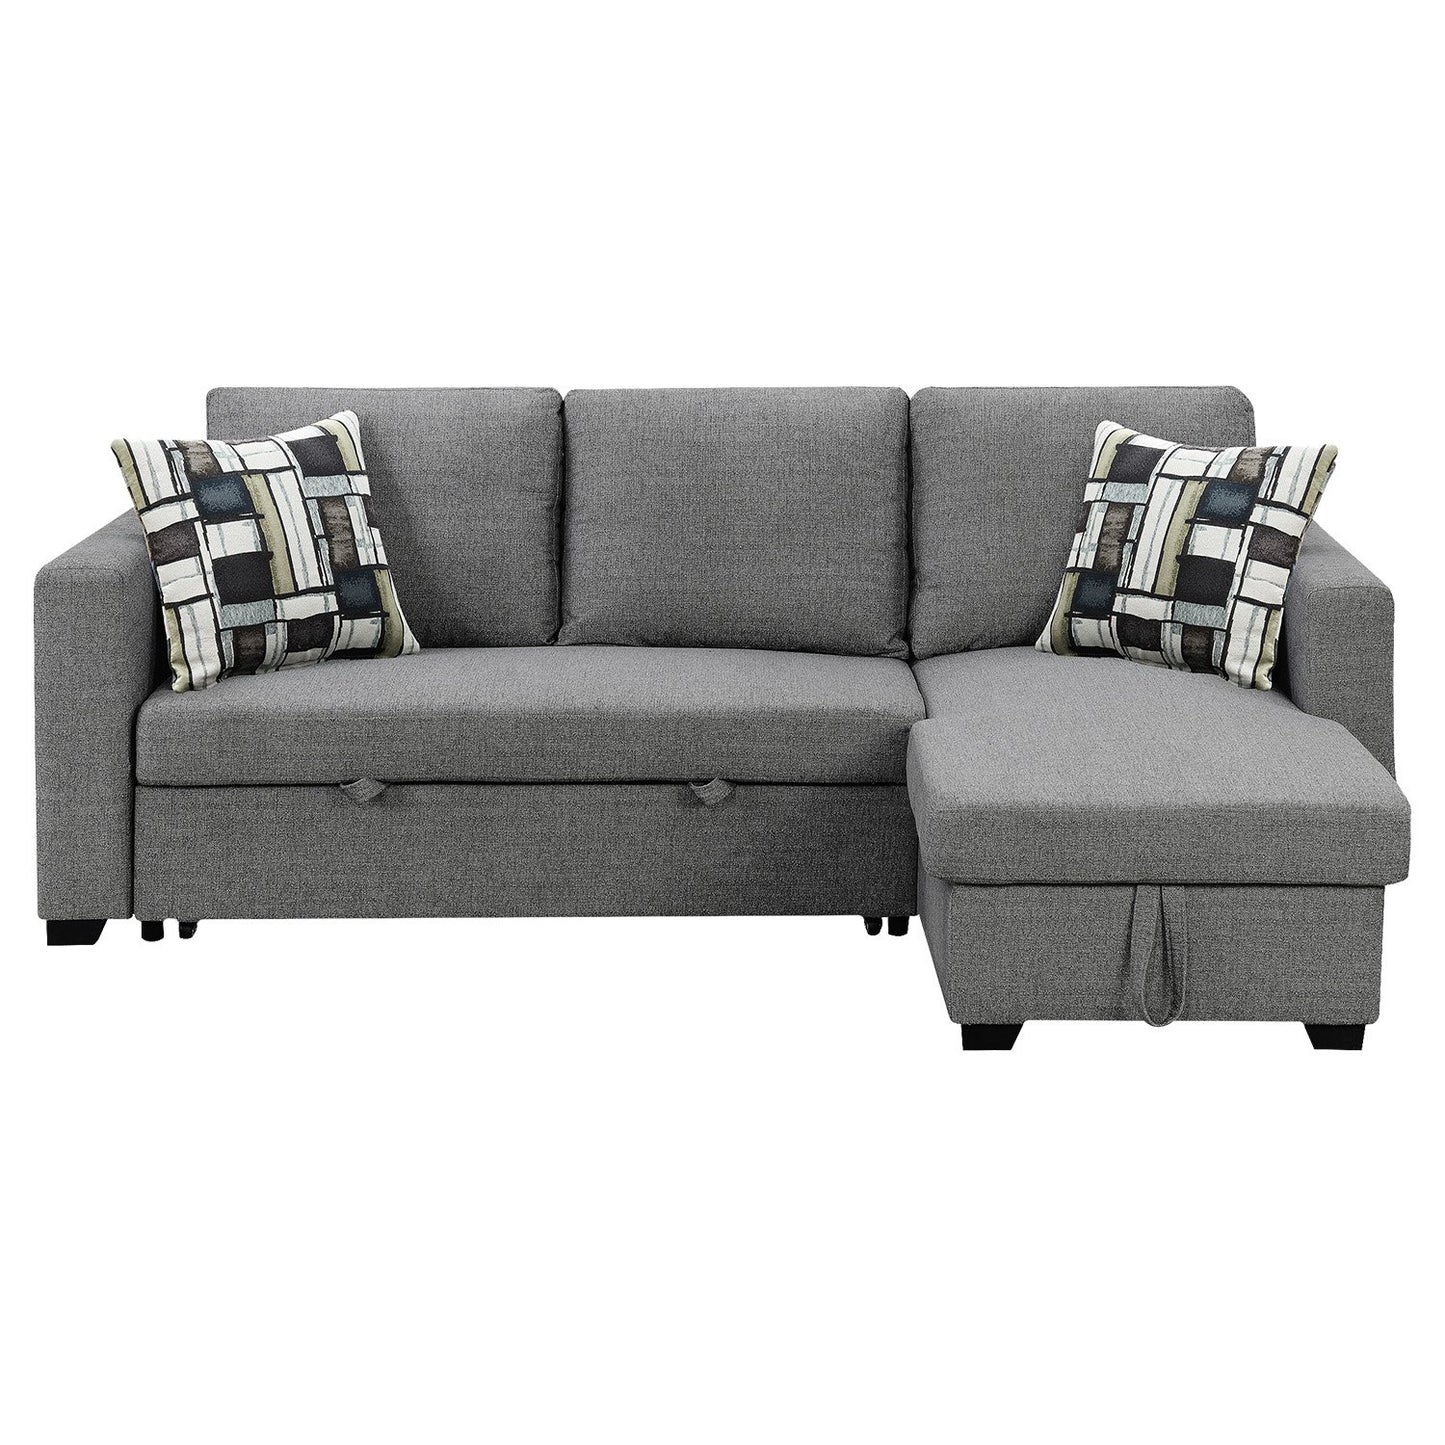 Meshi 3-Seater Pullout Sofa Bed with Storage Chaise Lounge - Grey